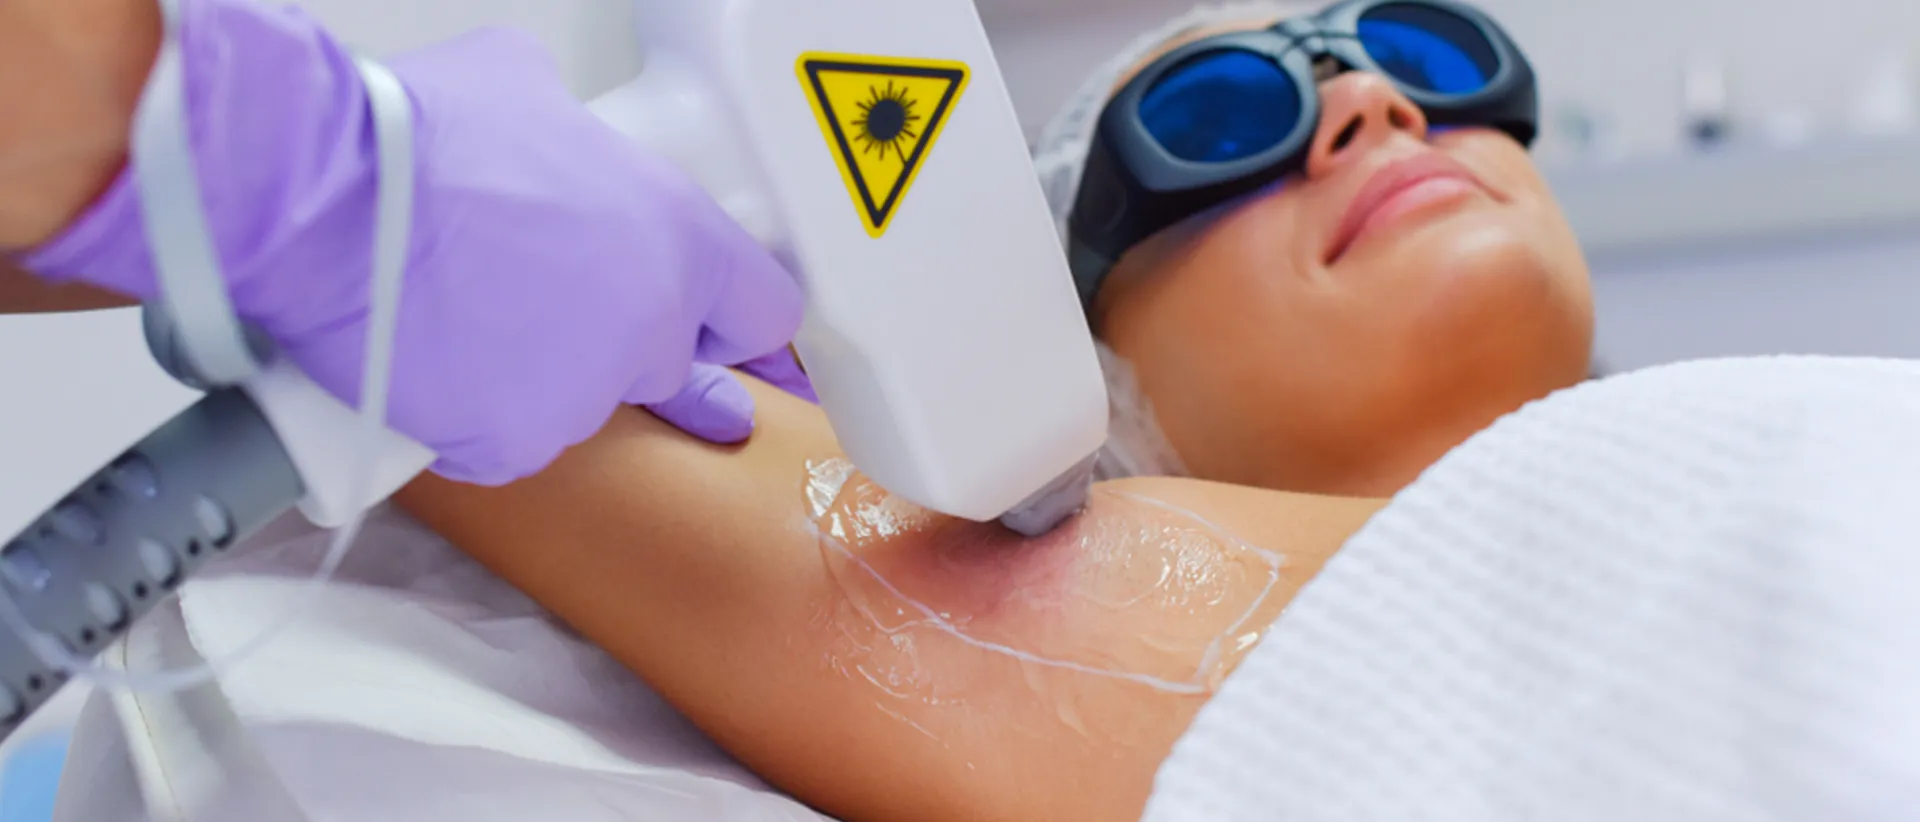 A woman wearing black glasses gets an armpit laser hair removal treatment done.
